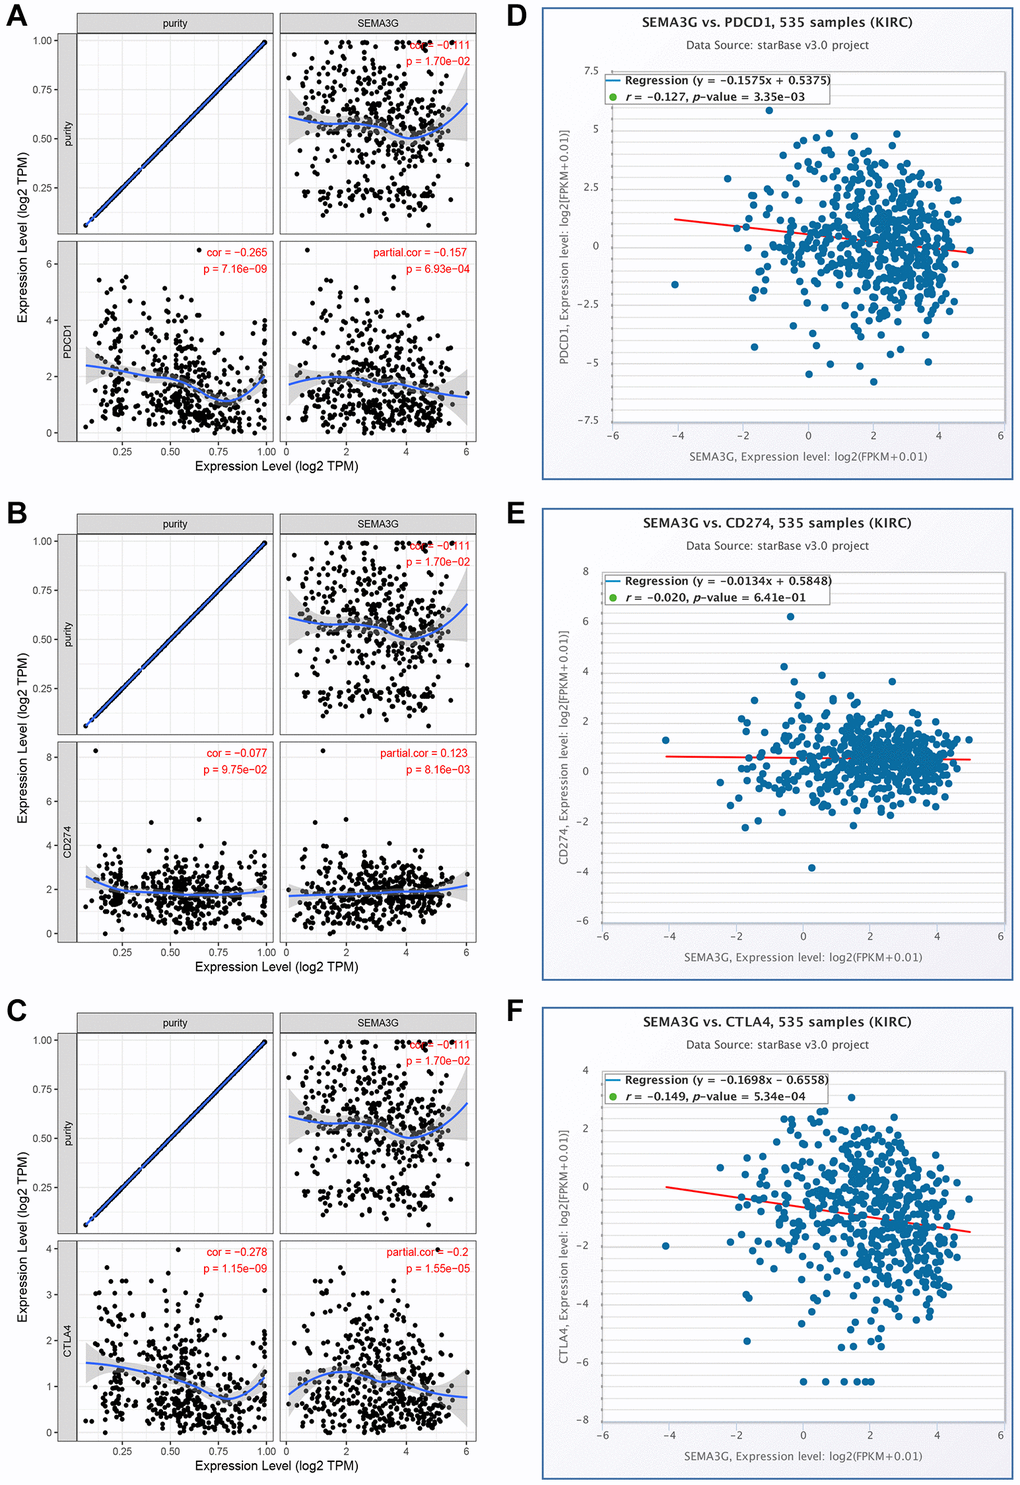 Correlation of SEMA3G expression with PD-1, PD-L1 or CTLA-4 expression in KIRC. Spearman correlation of SEMA3G with expression of PD-1 (A), PD-L1 (B) or CTLA-4 (C) in KIRC adjusted by purity using TIMER database. The expression correlation of SEMA3G with PD-1 (D), PD-L1 (E) or CTLA-4 (F) in KIRC validated by starBase database.